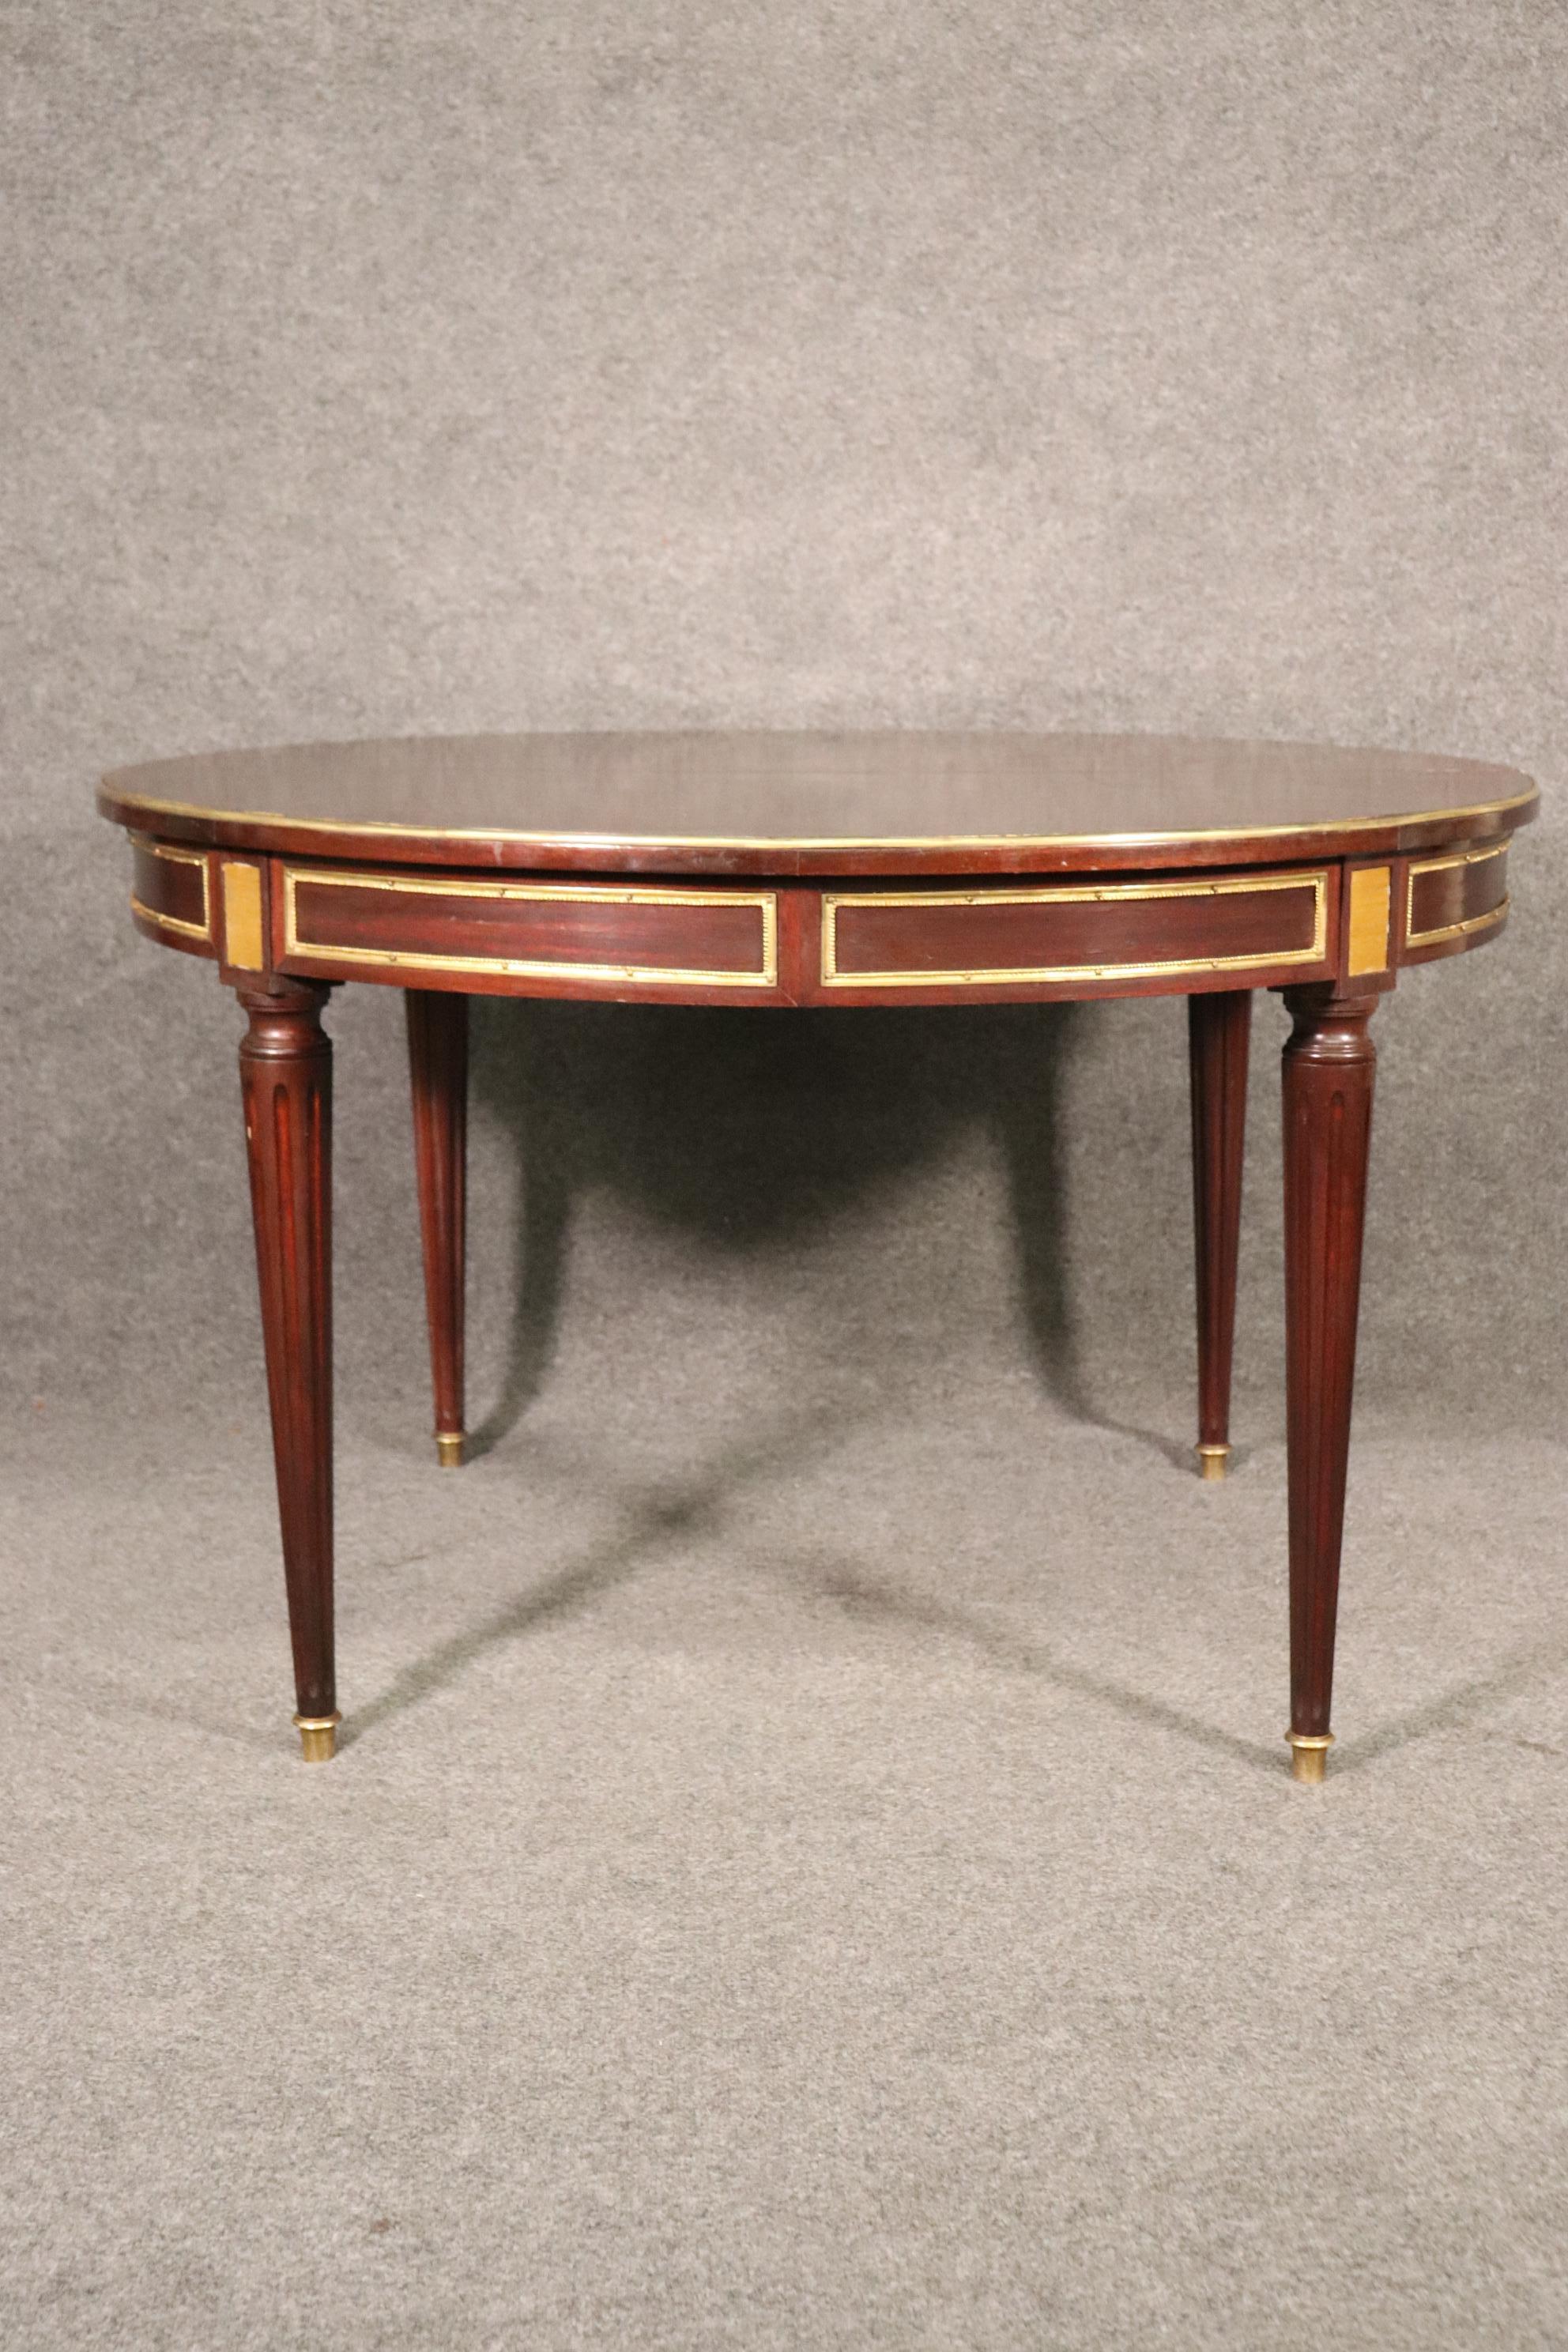 Mid-20th Century Round Signed Maison Jansen Brass Mounted Mahogany Louis XVI Dining Table w Leaf